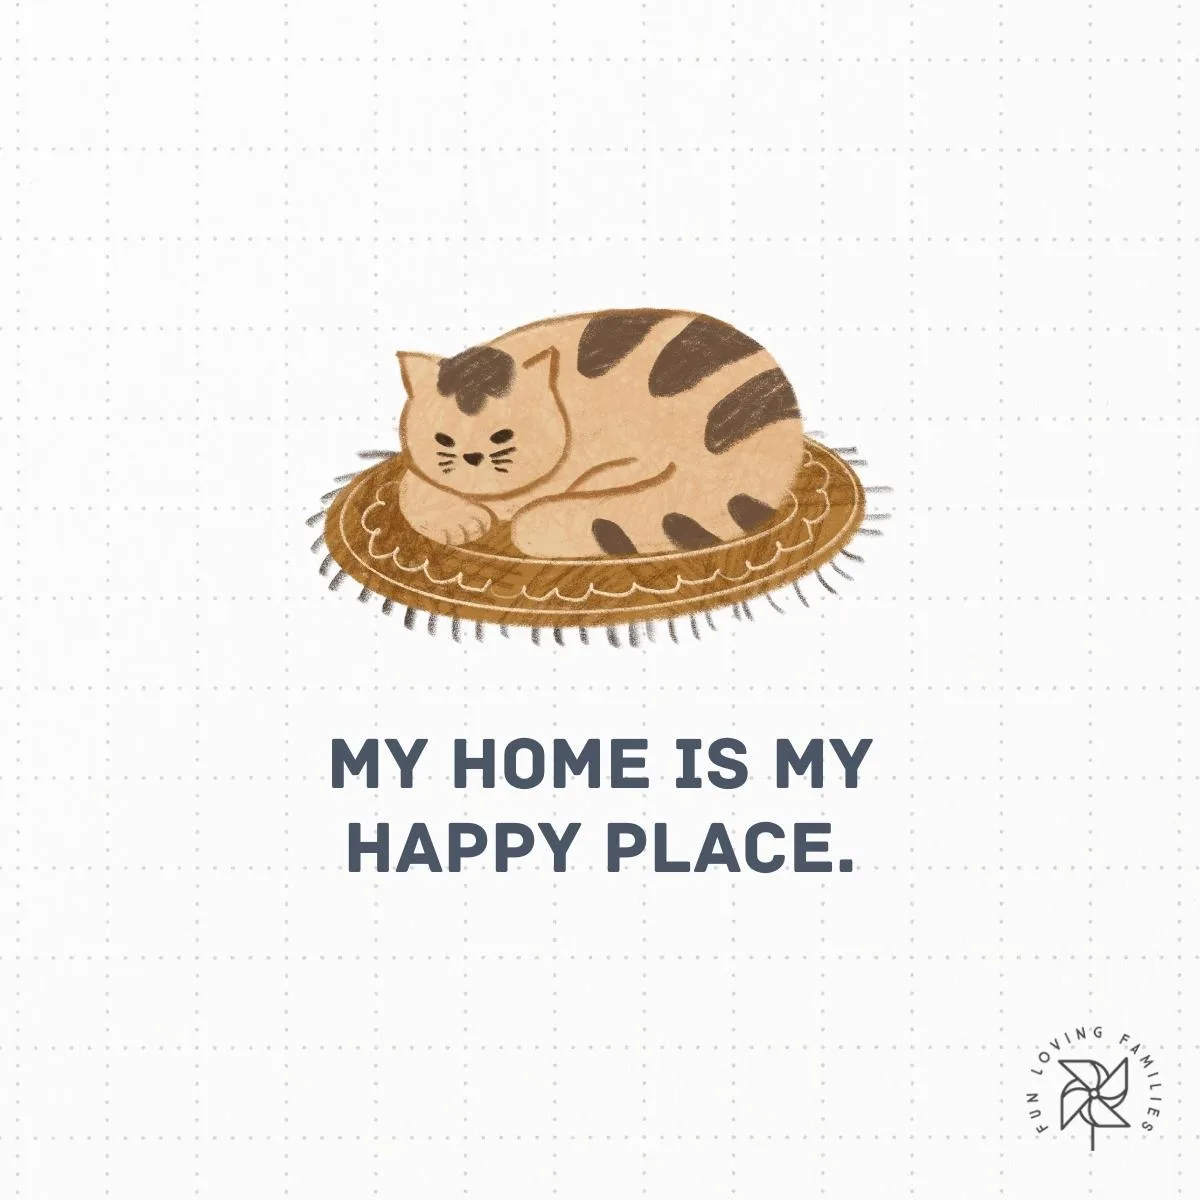 My home is my happy place affirmation